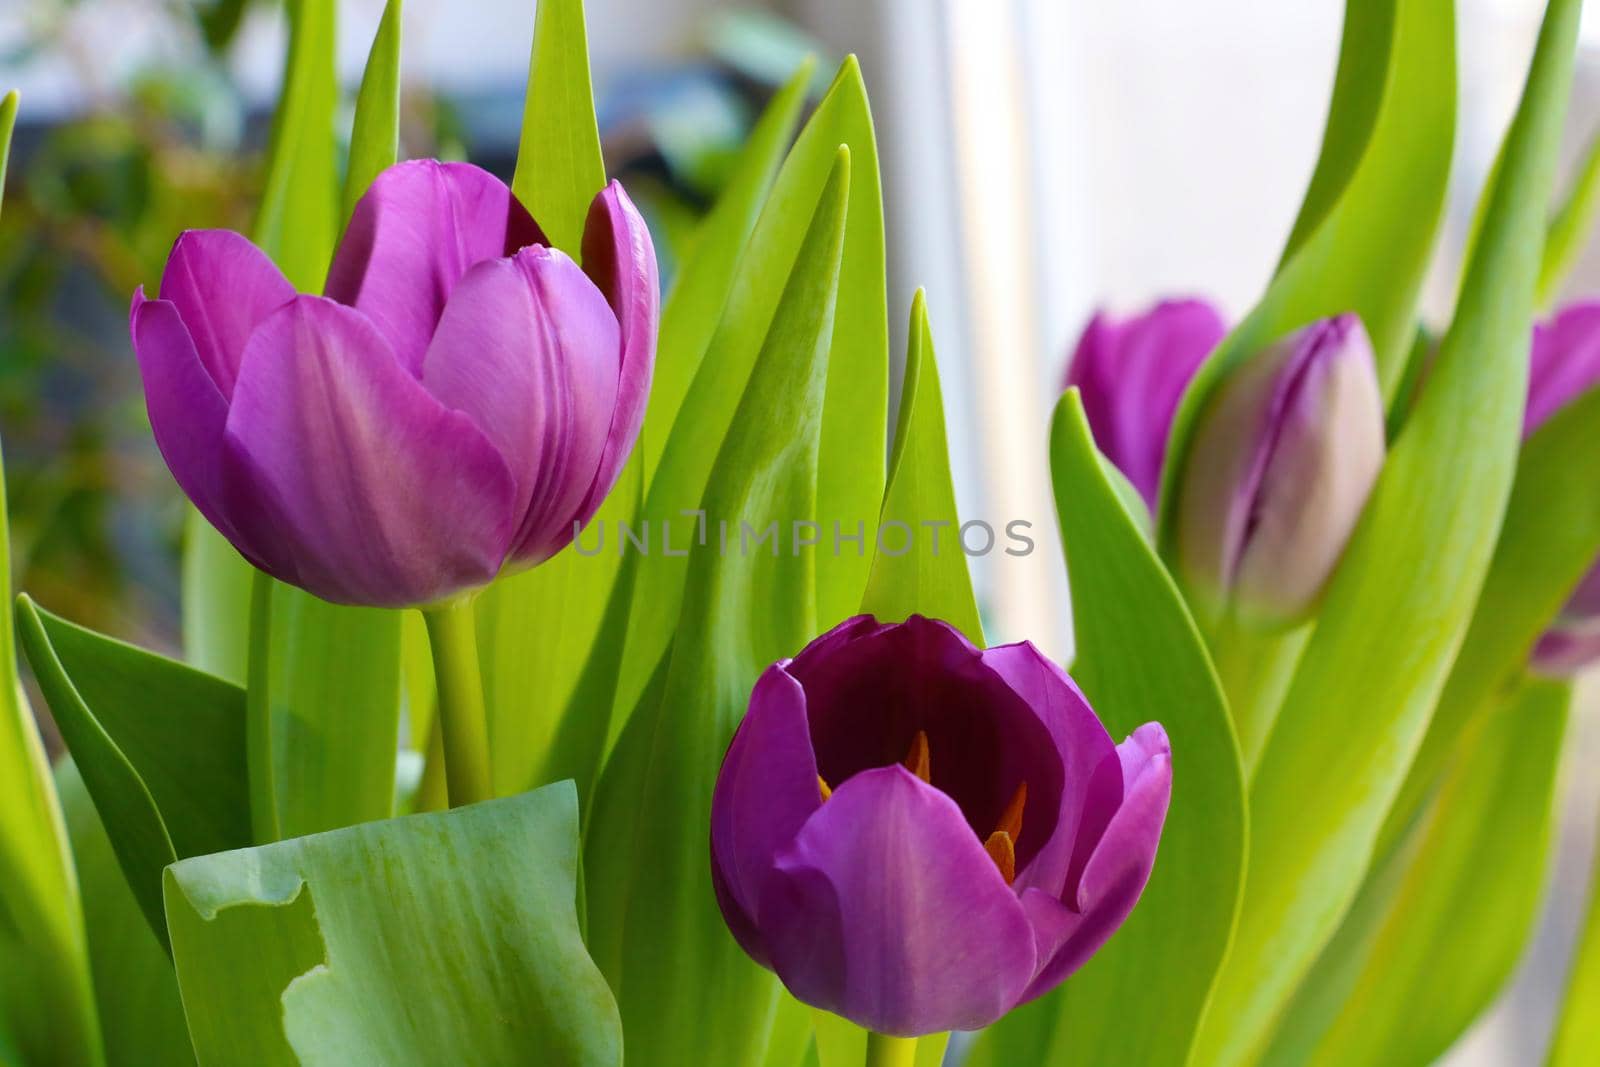 Blooming tulips in the park in spring on a sunny day. Fragrant scent from flowers